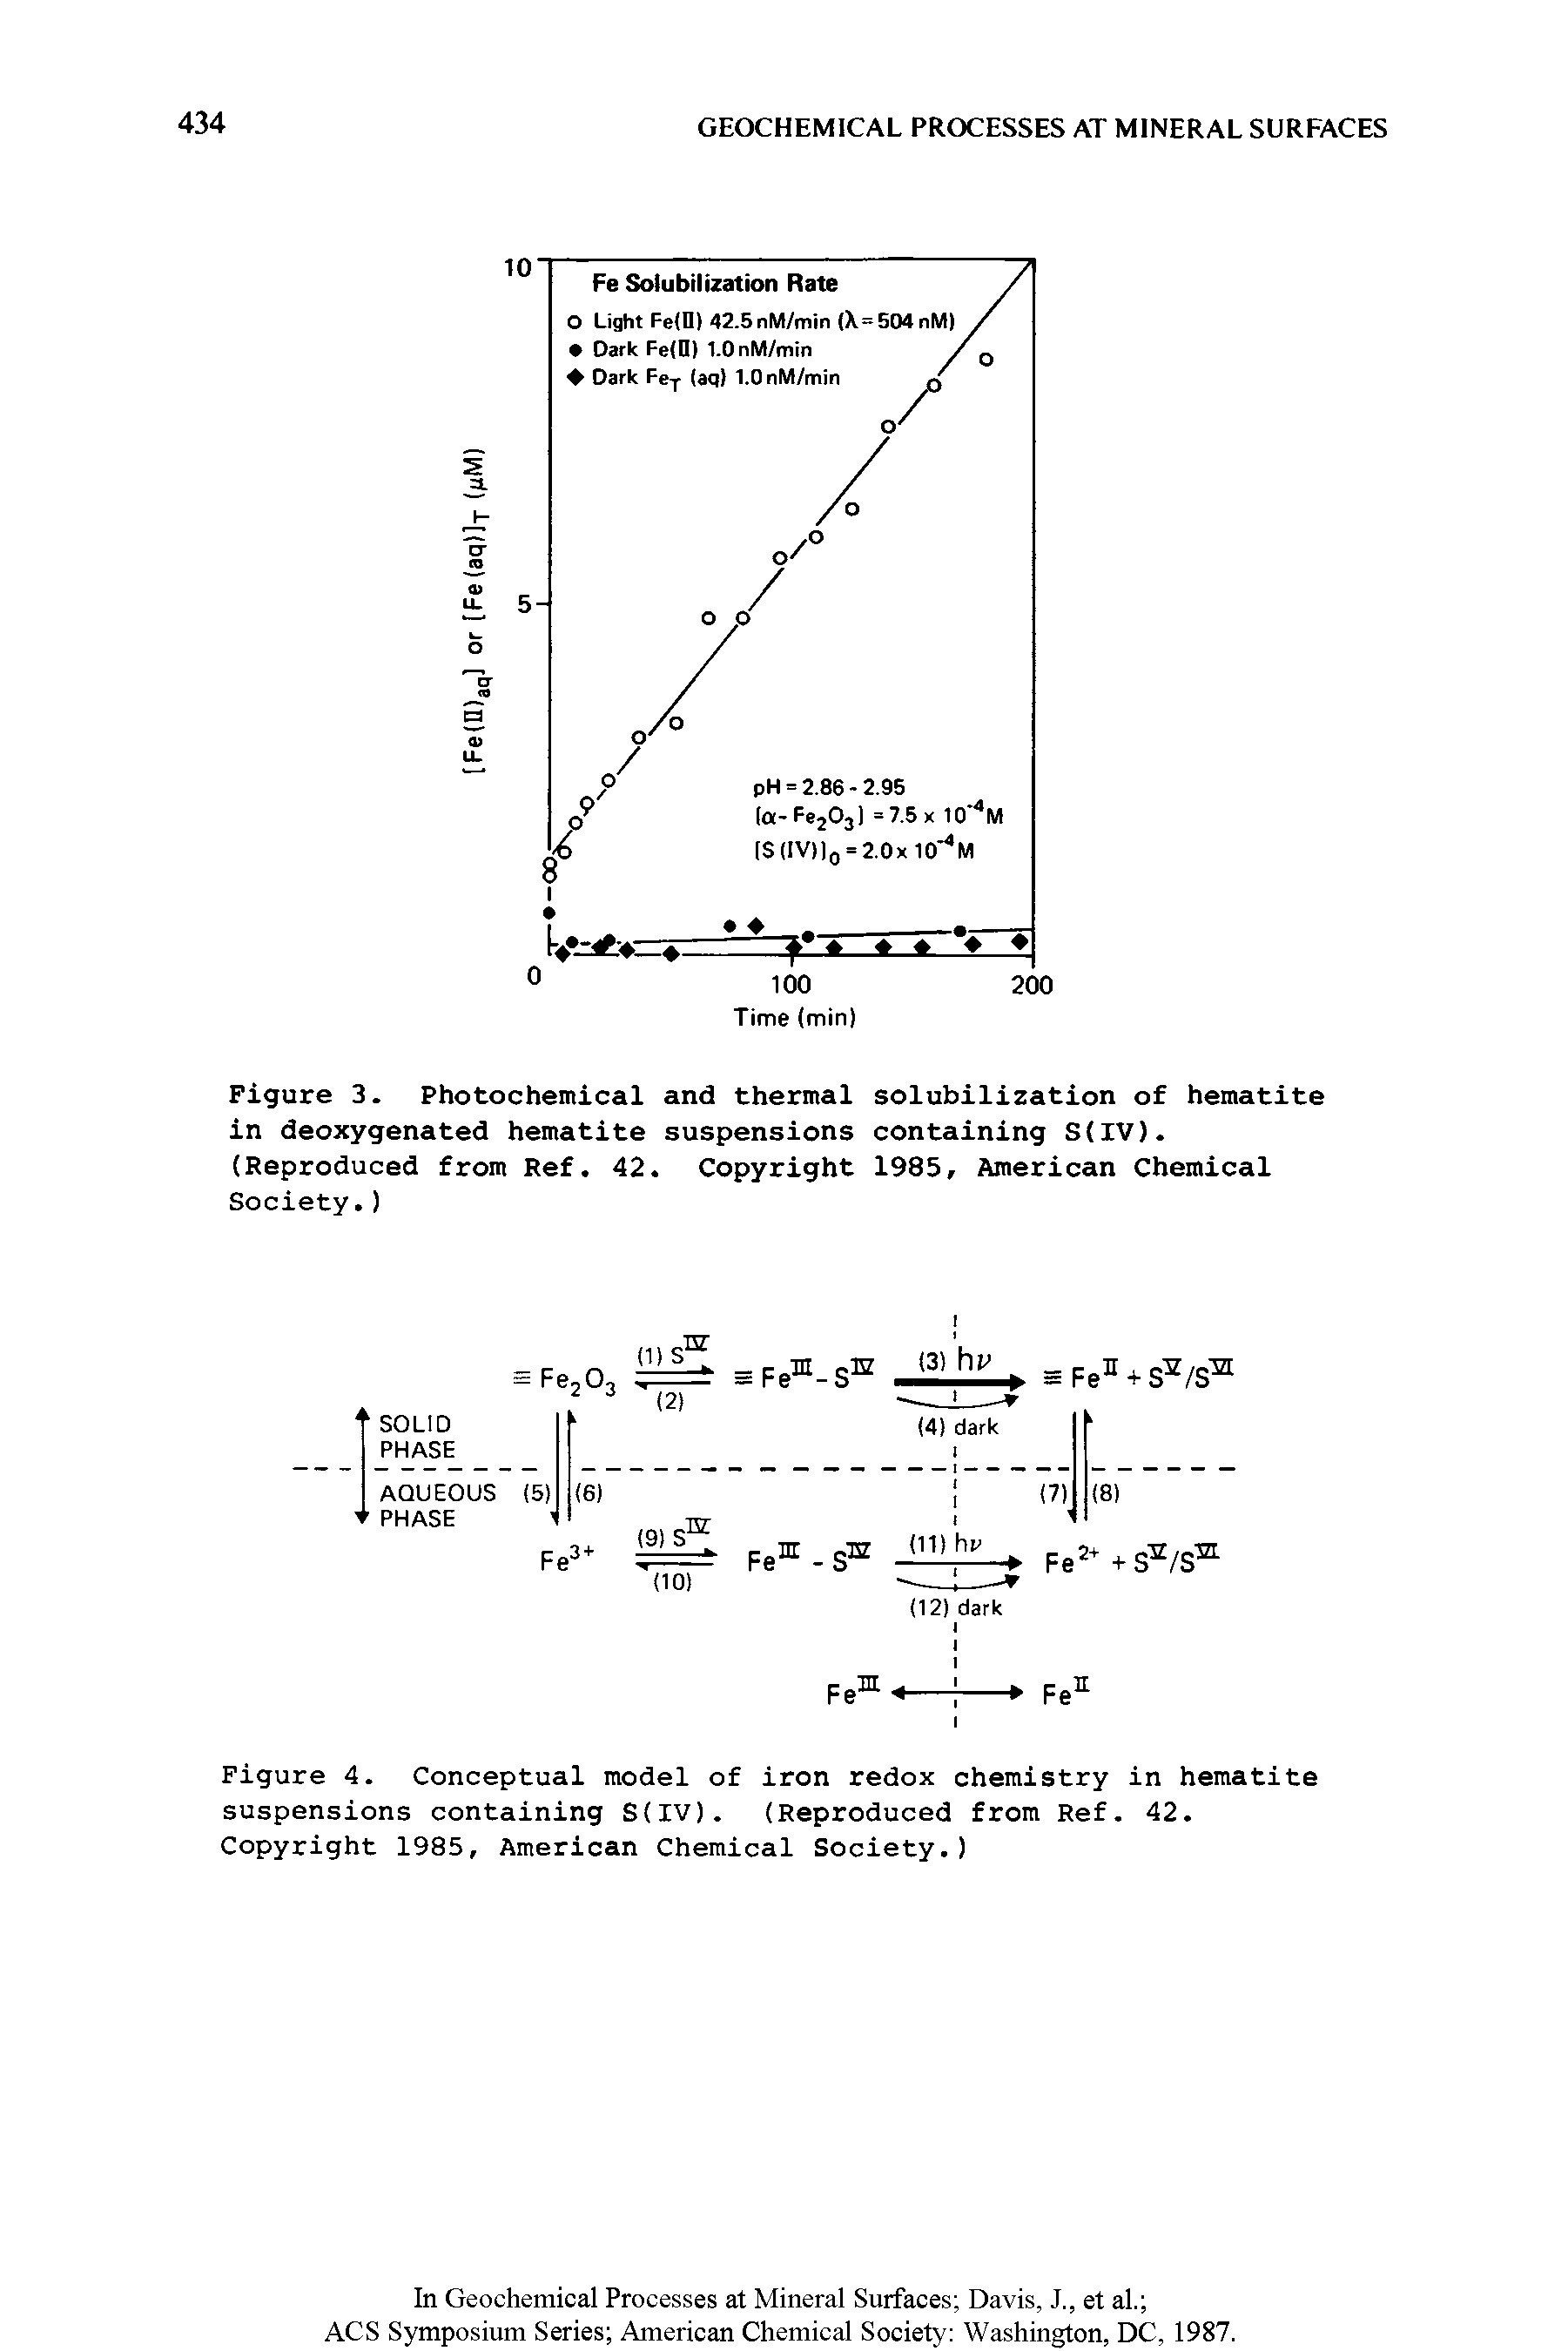 Figure 3. Photochemical and thermal solubilization of hematite in deoxygenated hematite suspensions containing S(IV). (Reproduced from Ref. 42. Copyright 1985, American Chemical Society.)...